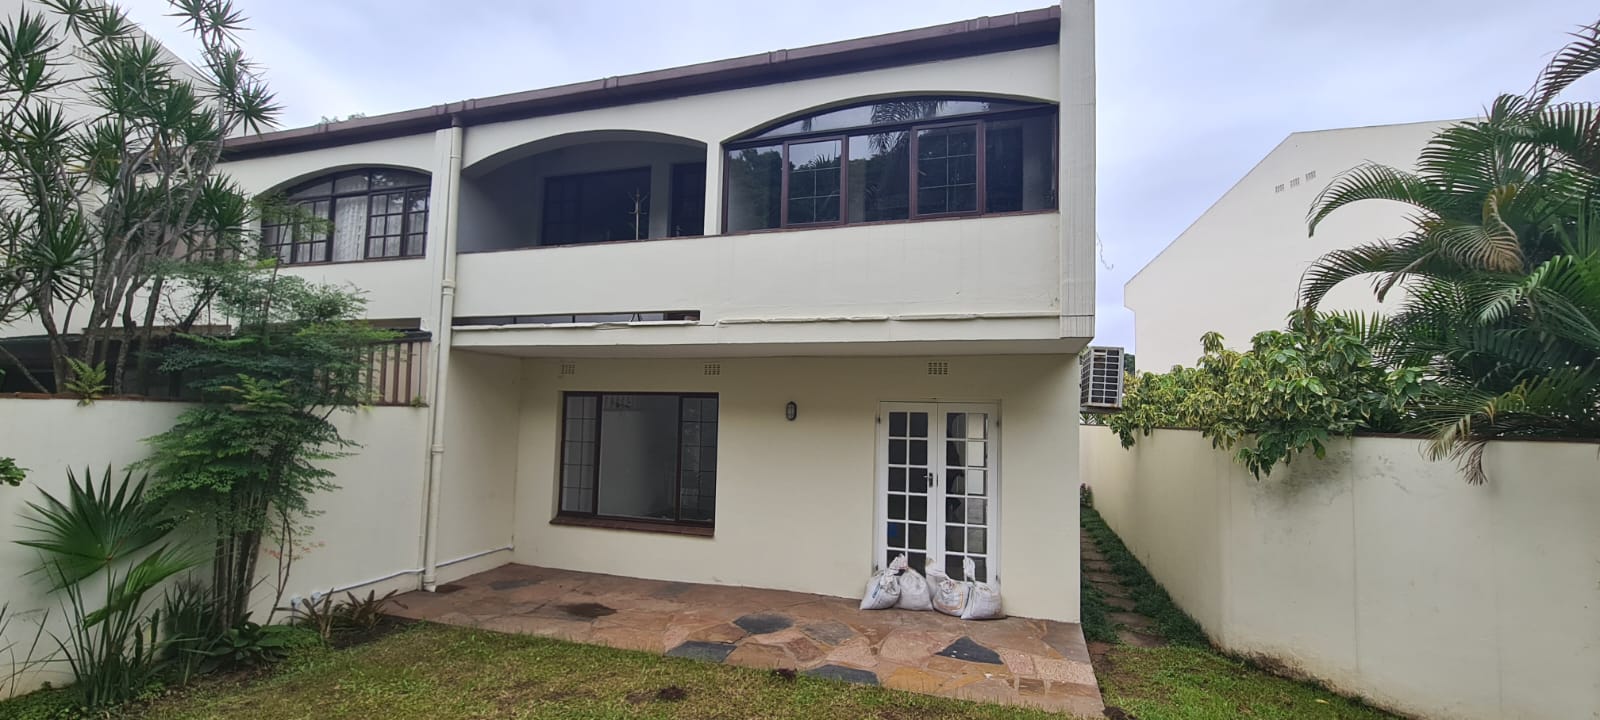 3 Bedroom Townhouse  For Sale in Westville | 1360029 | Property.CoZa